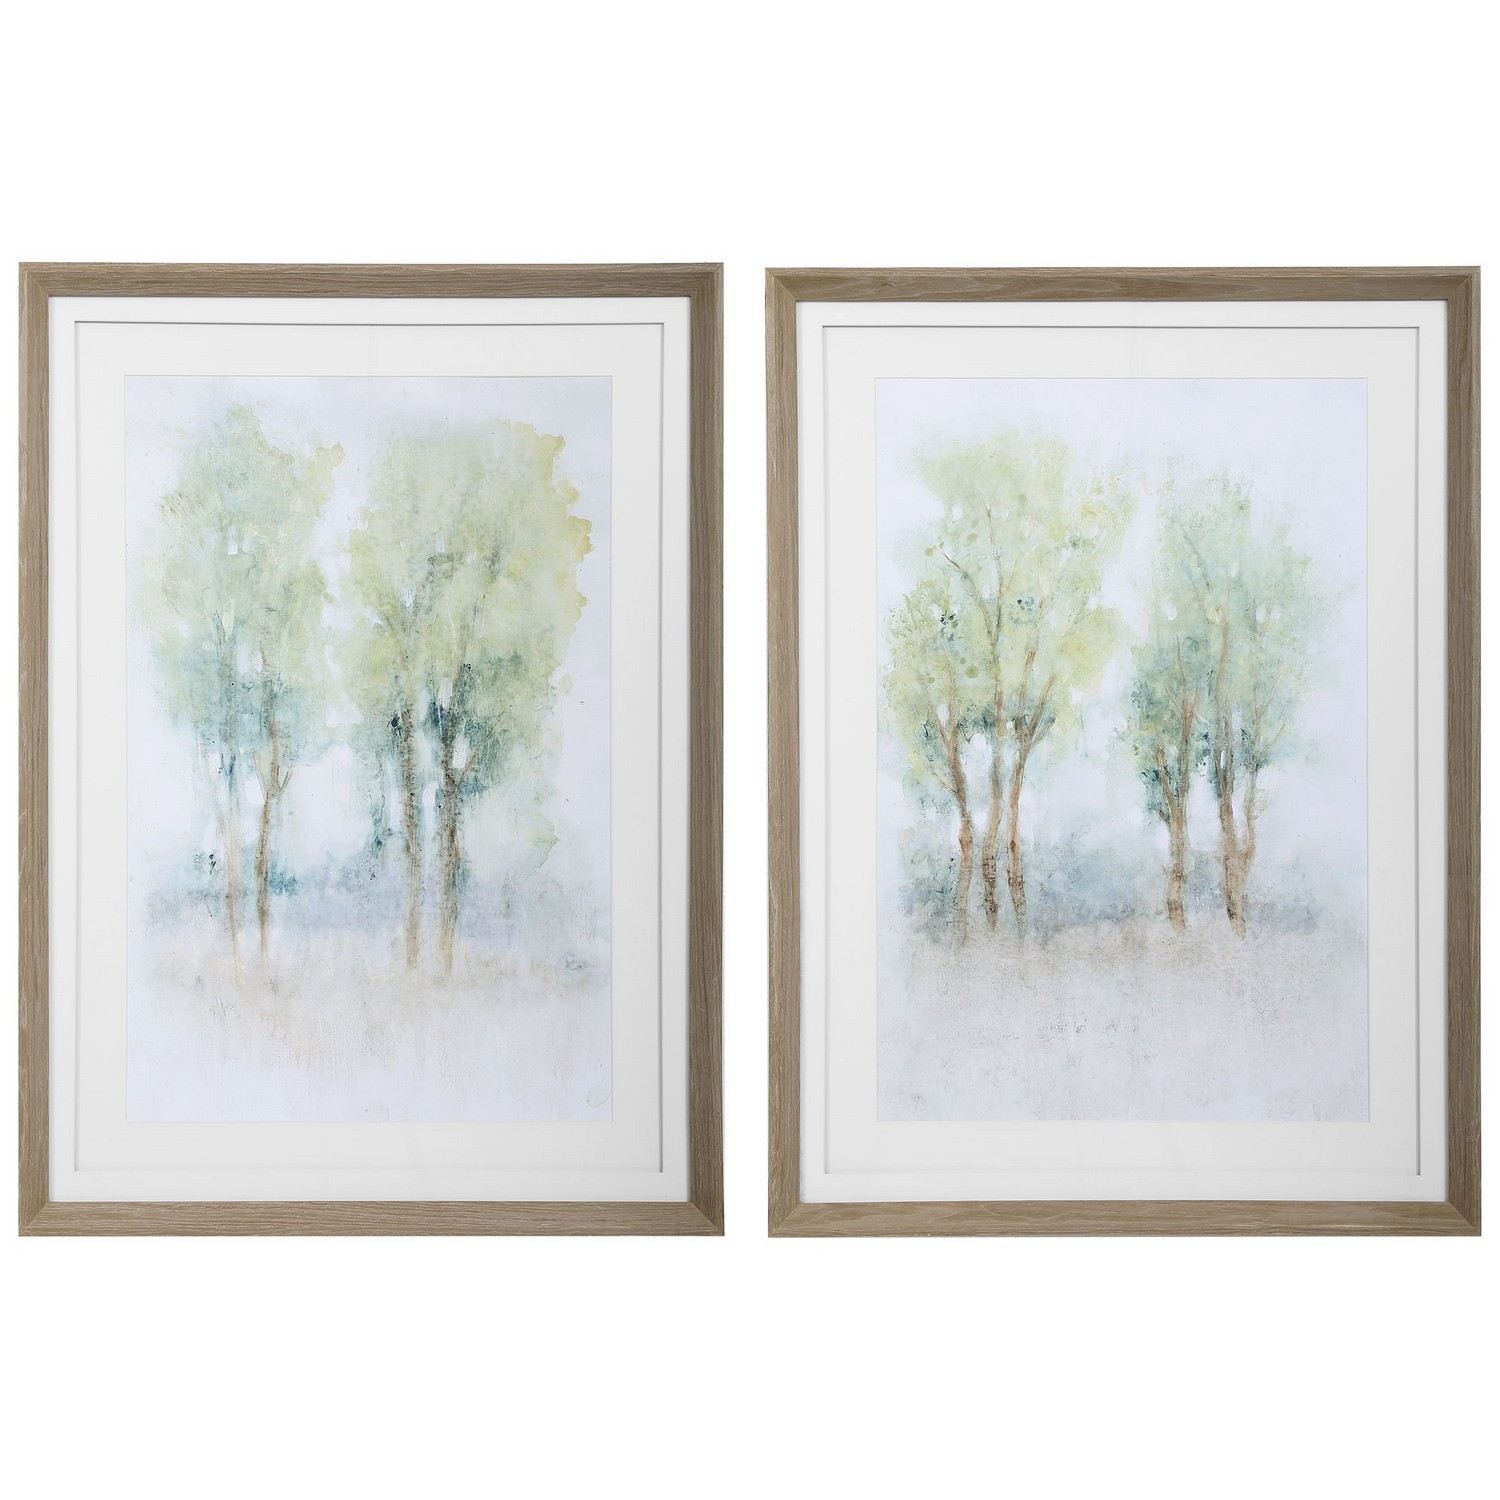 Uttermost Meadow View Framed Prints - Set of 2